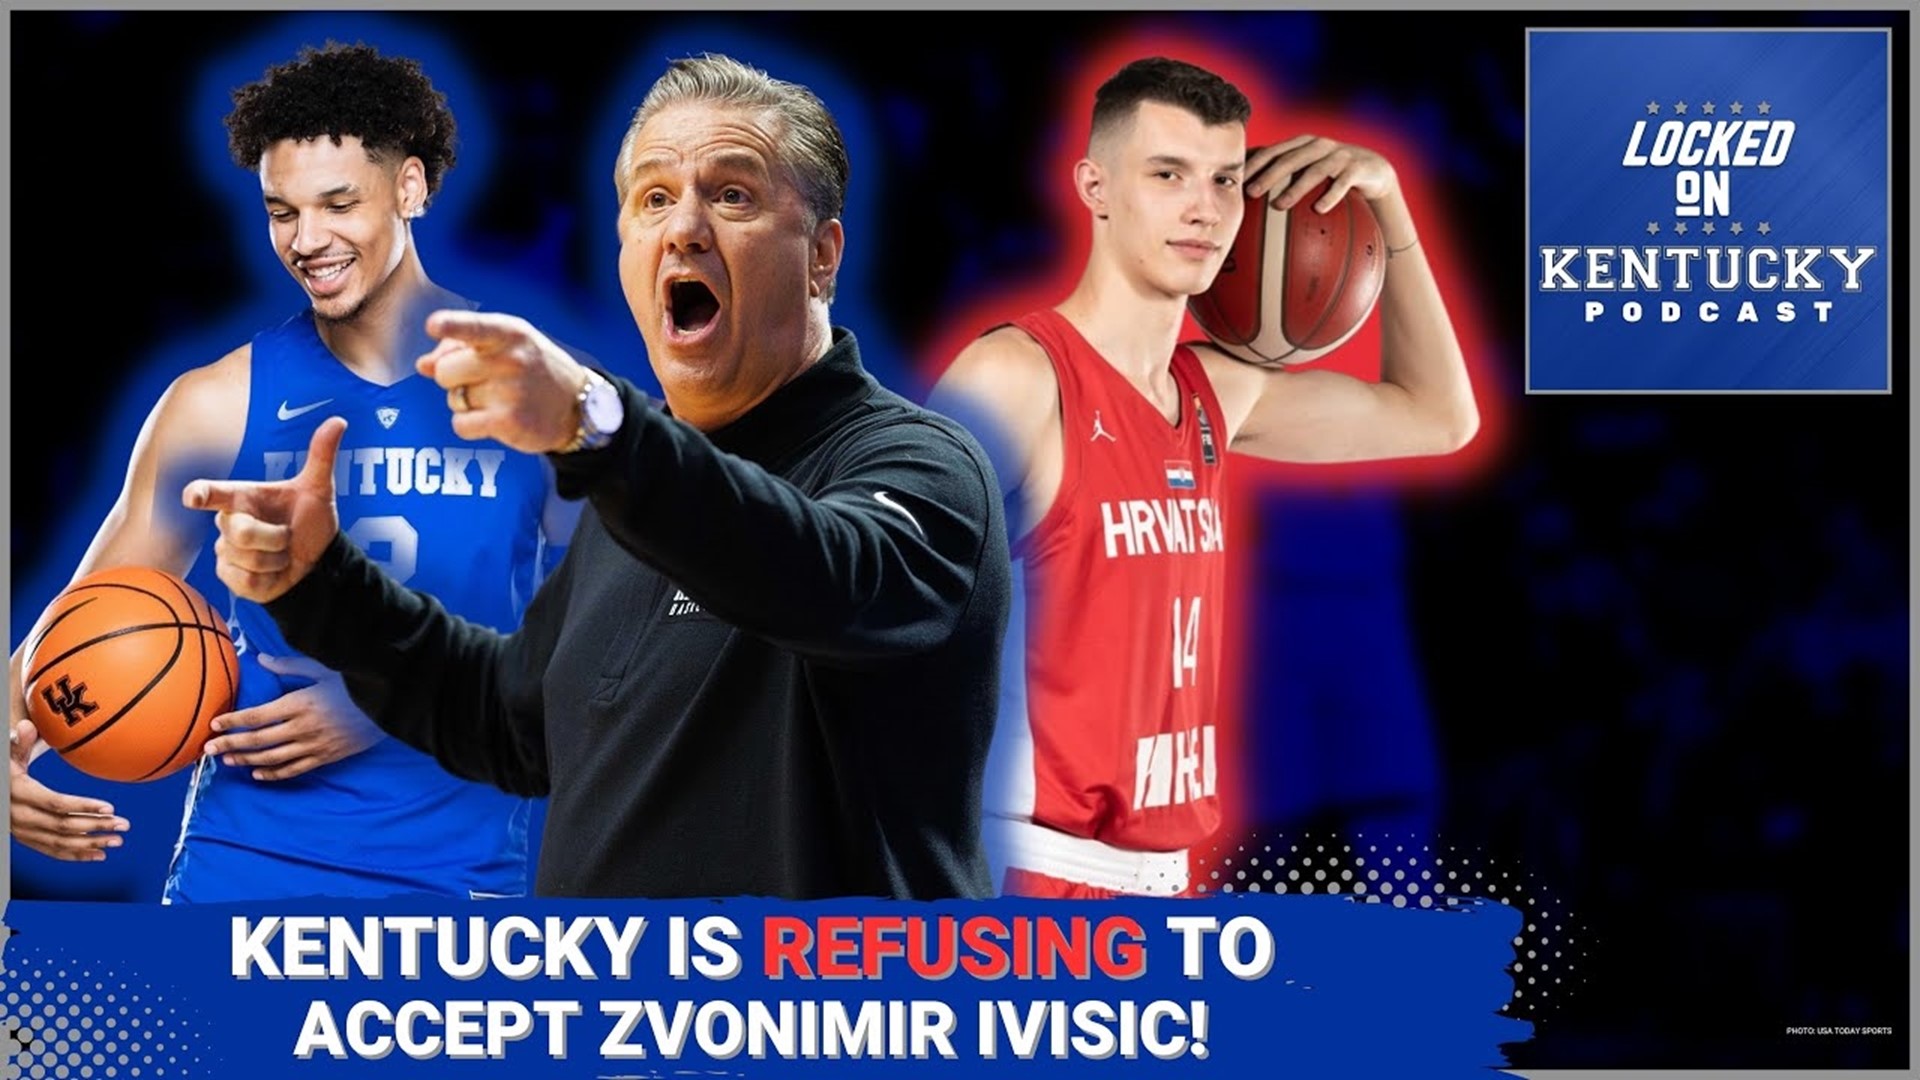 Kentucky Basketball's efforts to bring Zvonimir Ivisic onto campus are currently facing an unexpected hurdle.